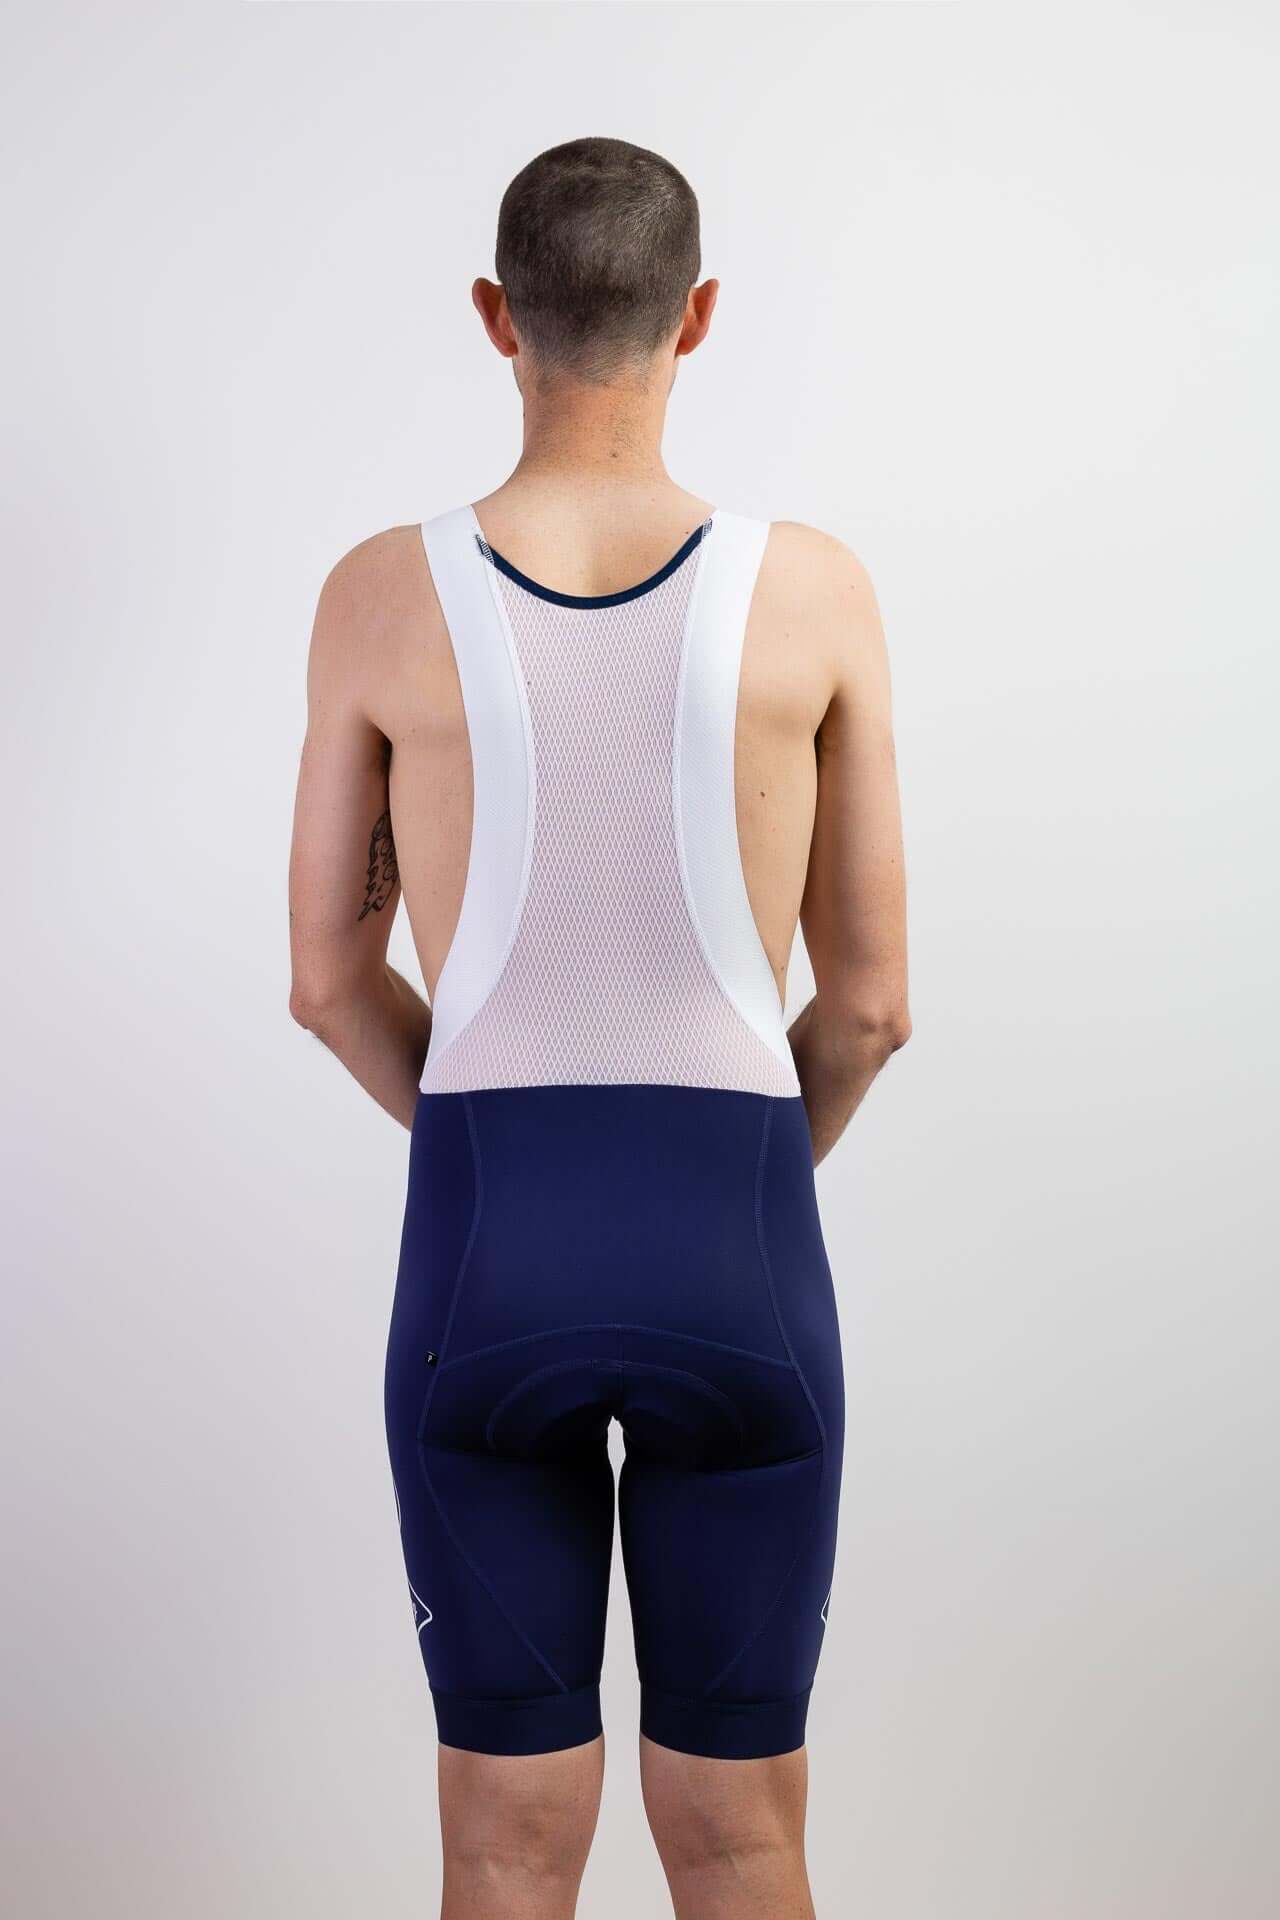 Men's Cycling Anniversary Bib Shorts - Engineered with high-performance fabric for ultimate comfort and performance. Celebrate with style on your bike rides! 